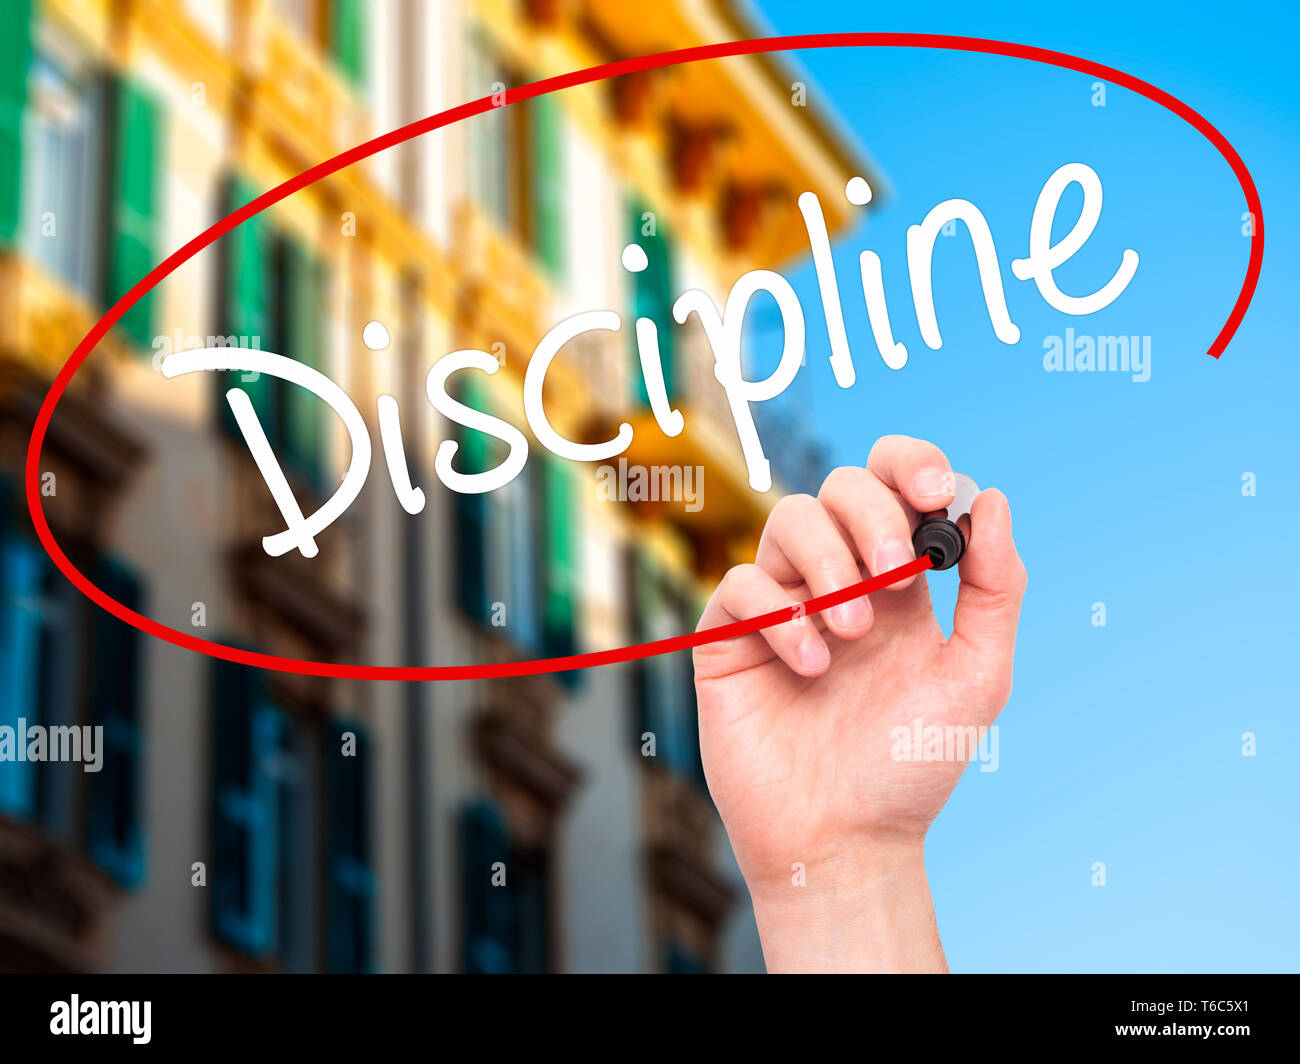 Man Hand writing Discipline with black marker on visual screen Stock Photo